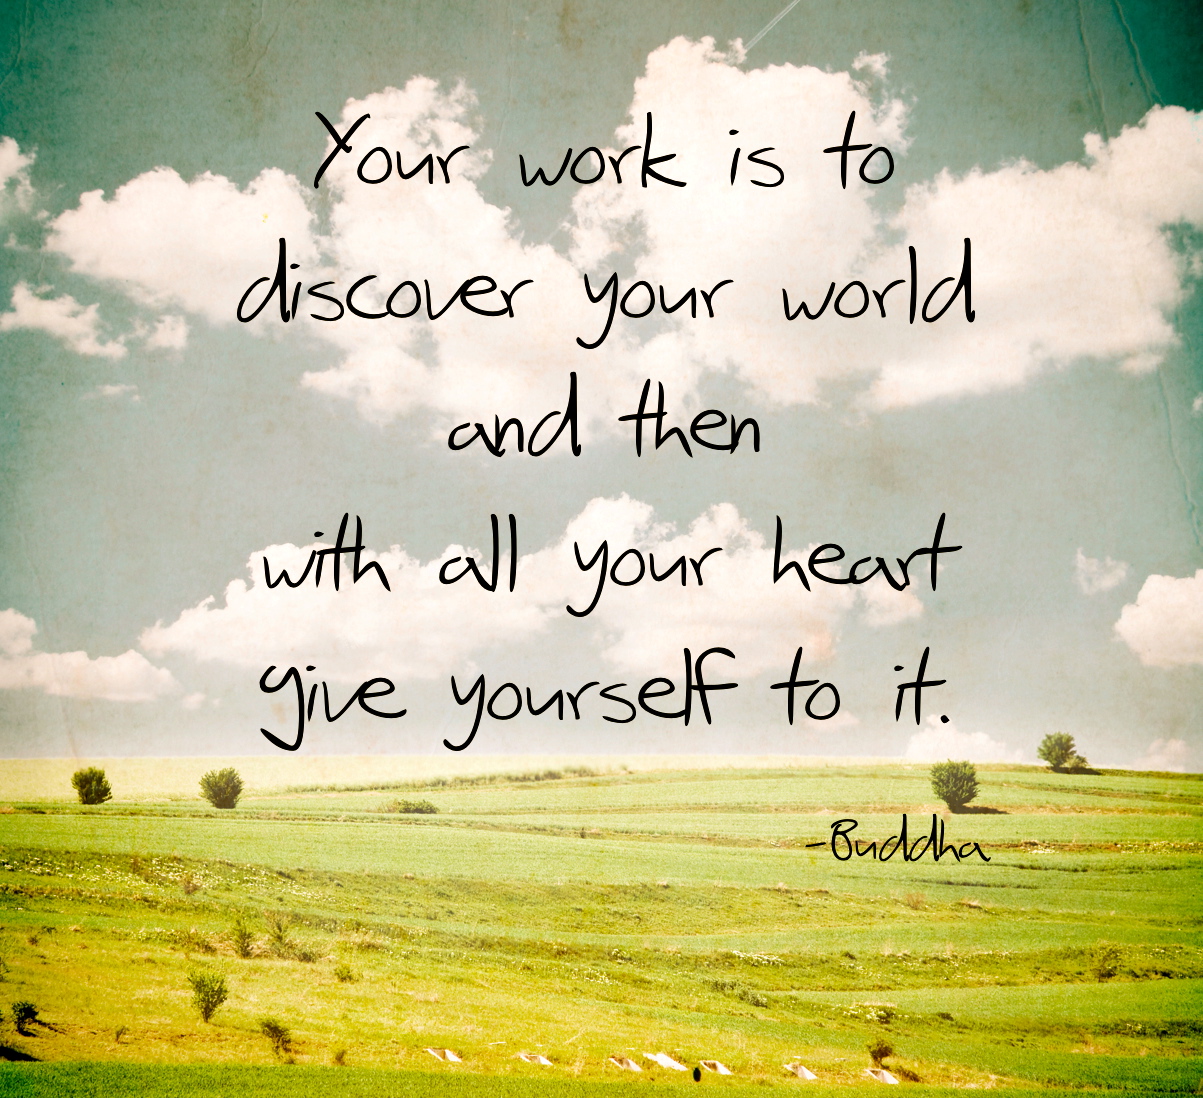 Your Work Is To Discares Your World And Then With All Your Heart Give Yourself To It. Buddha